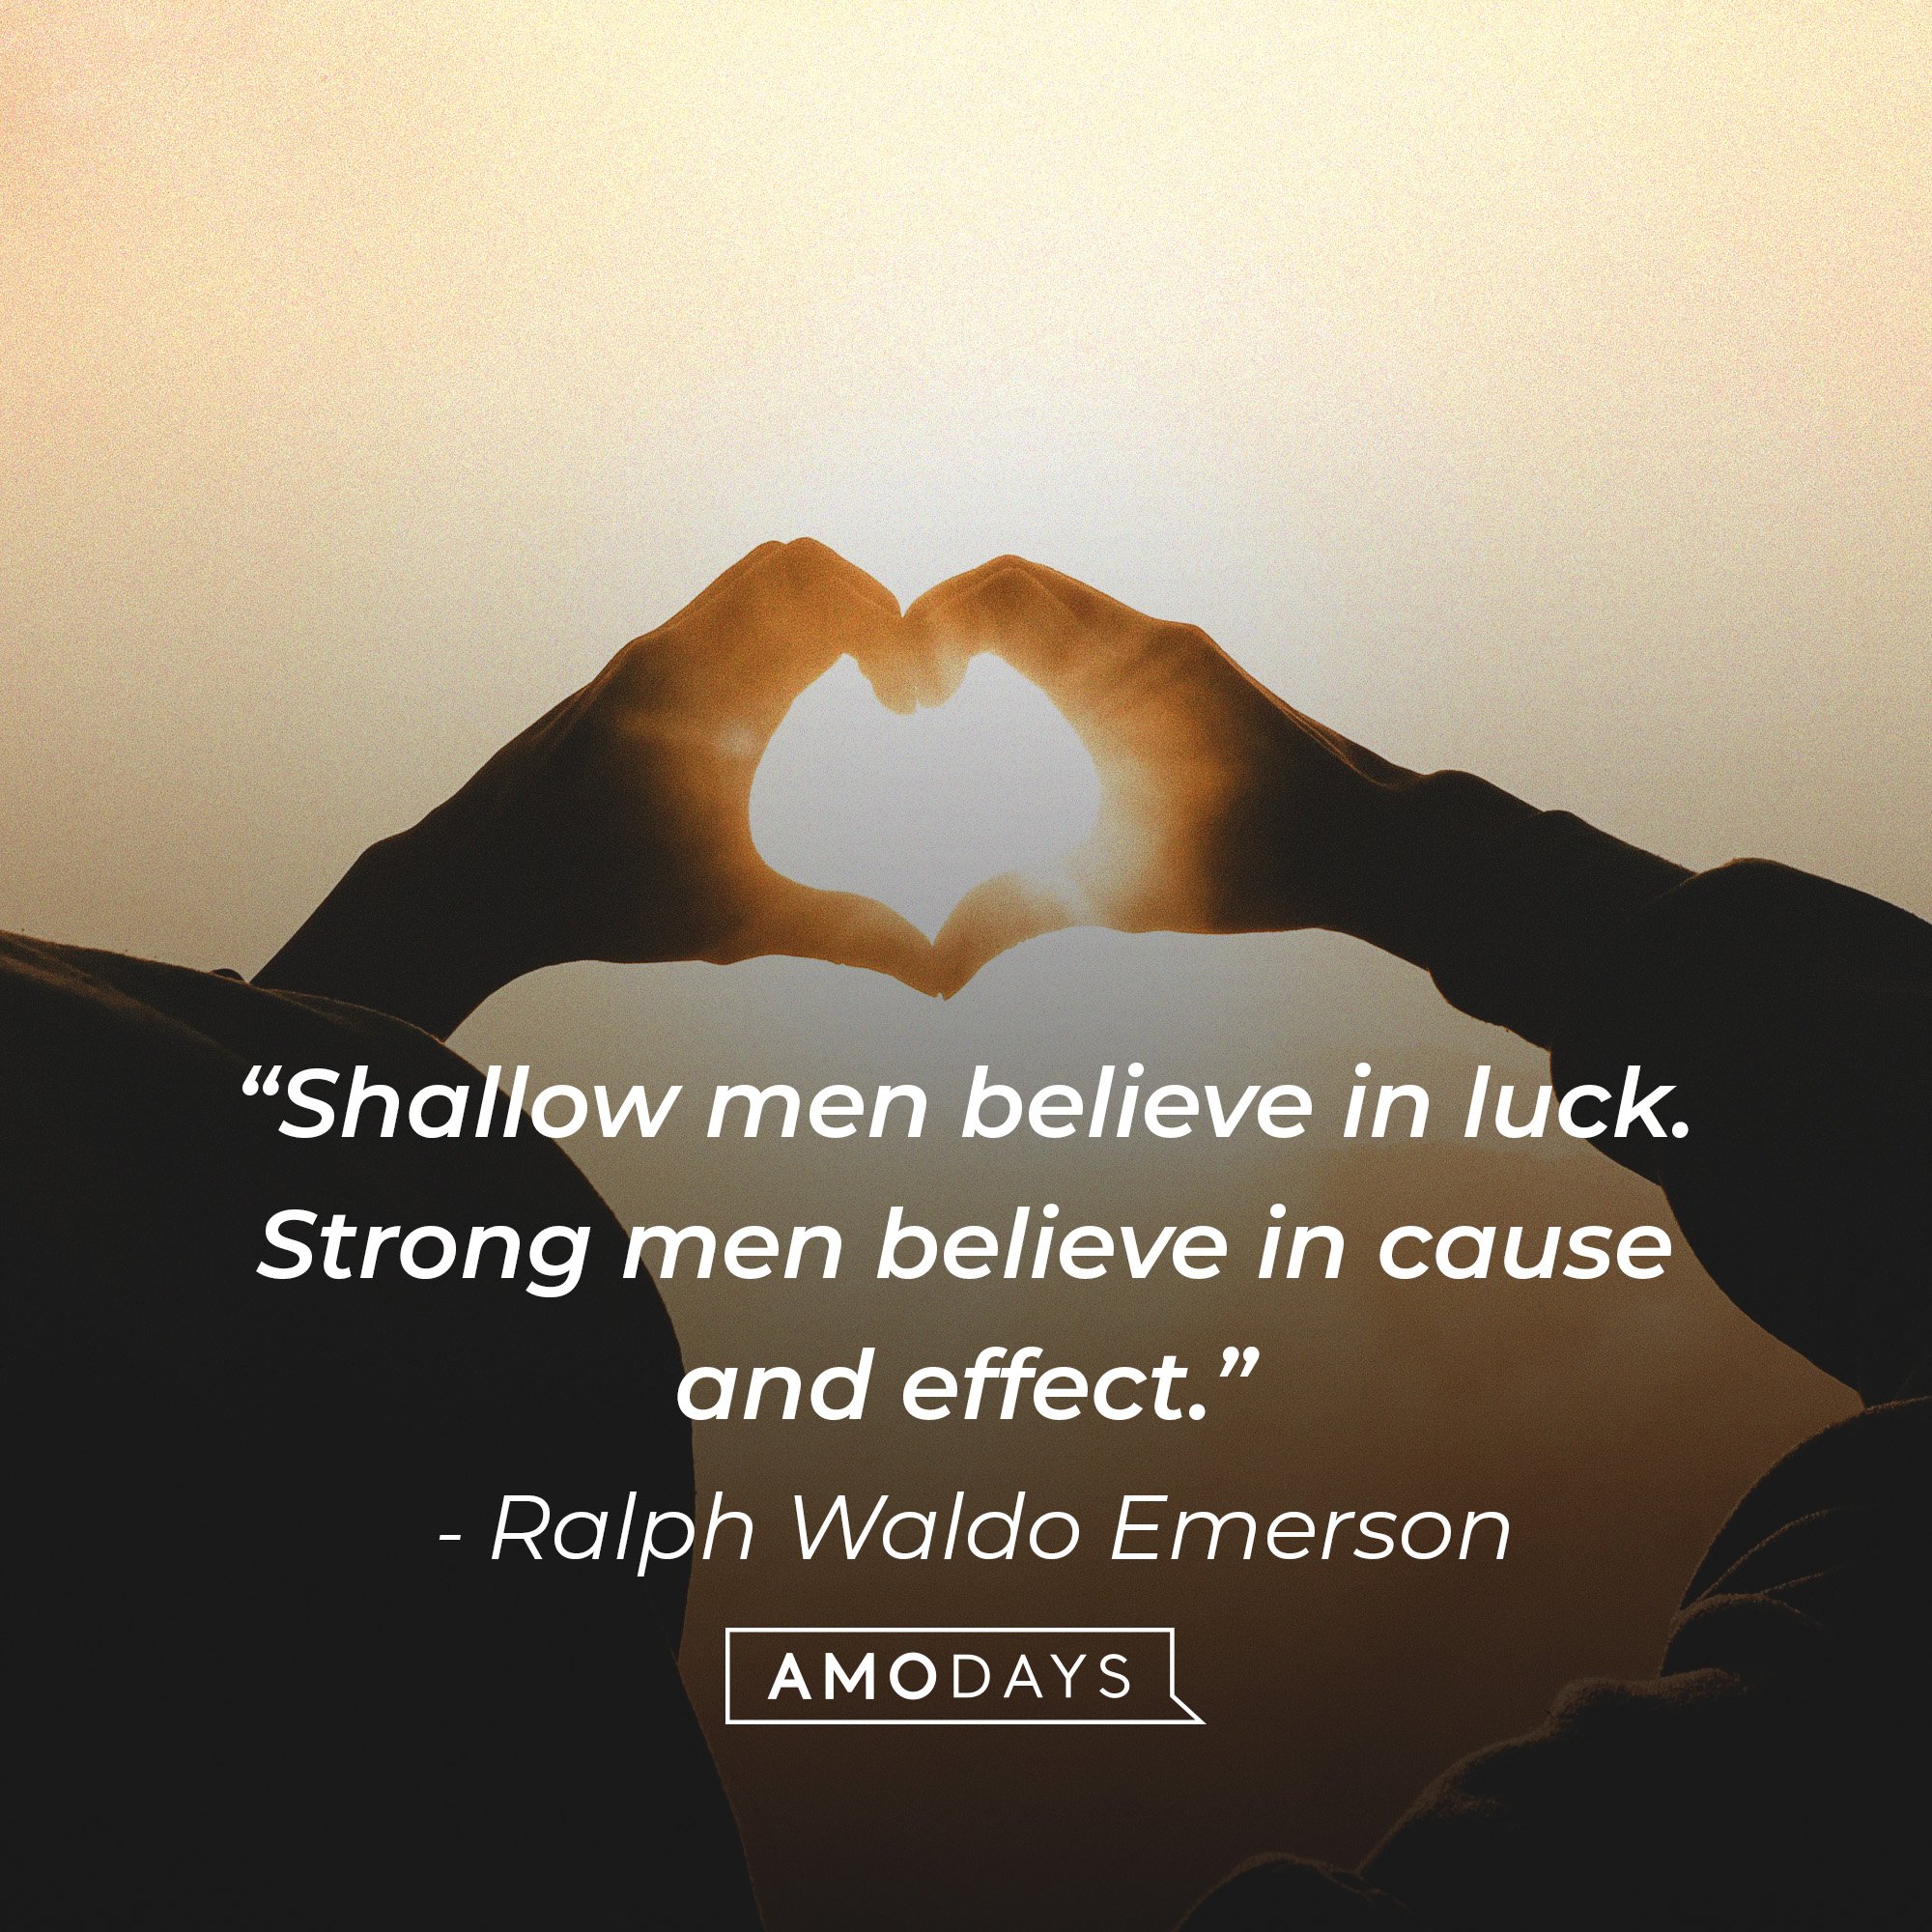 Ralph Waldo Emerson's quote: “Shallow men believe in luck. Strong men believe in cause and effect.” | Image" AmoDays